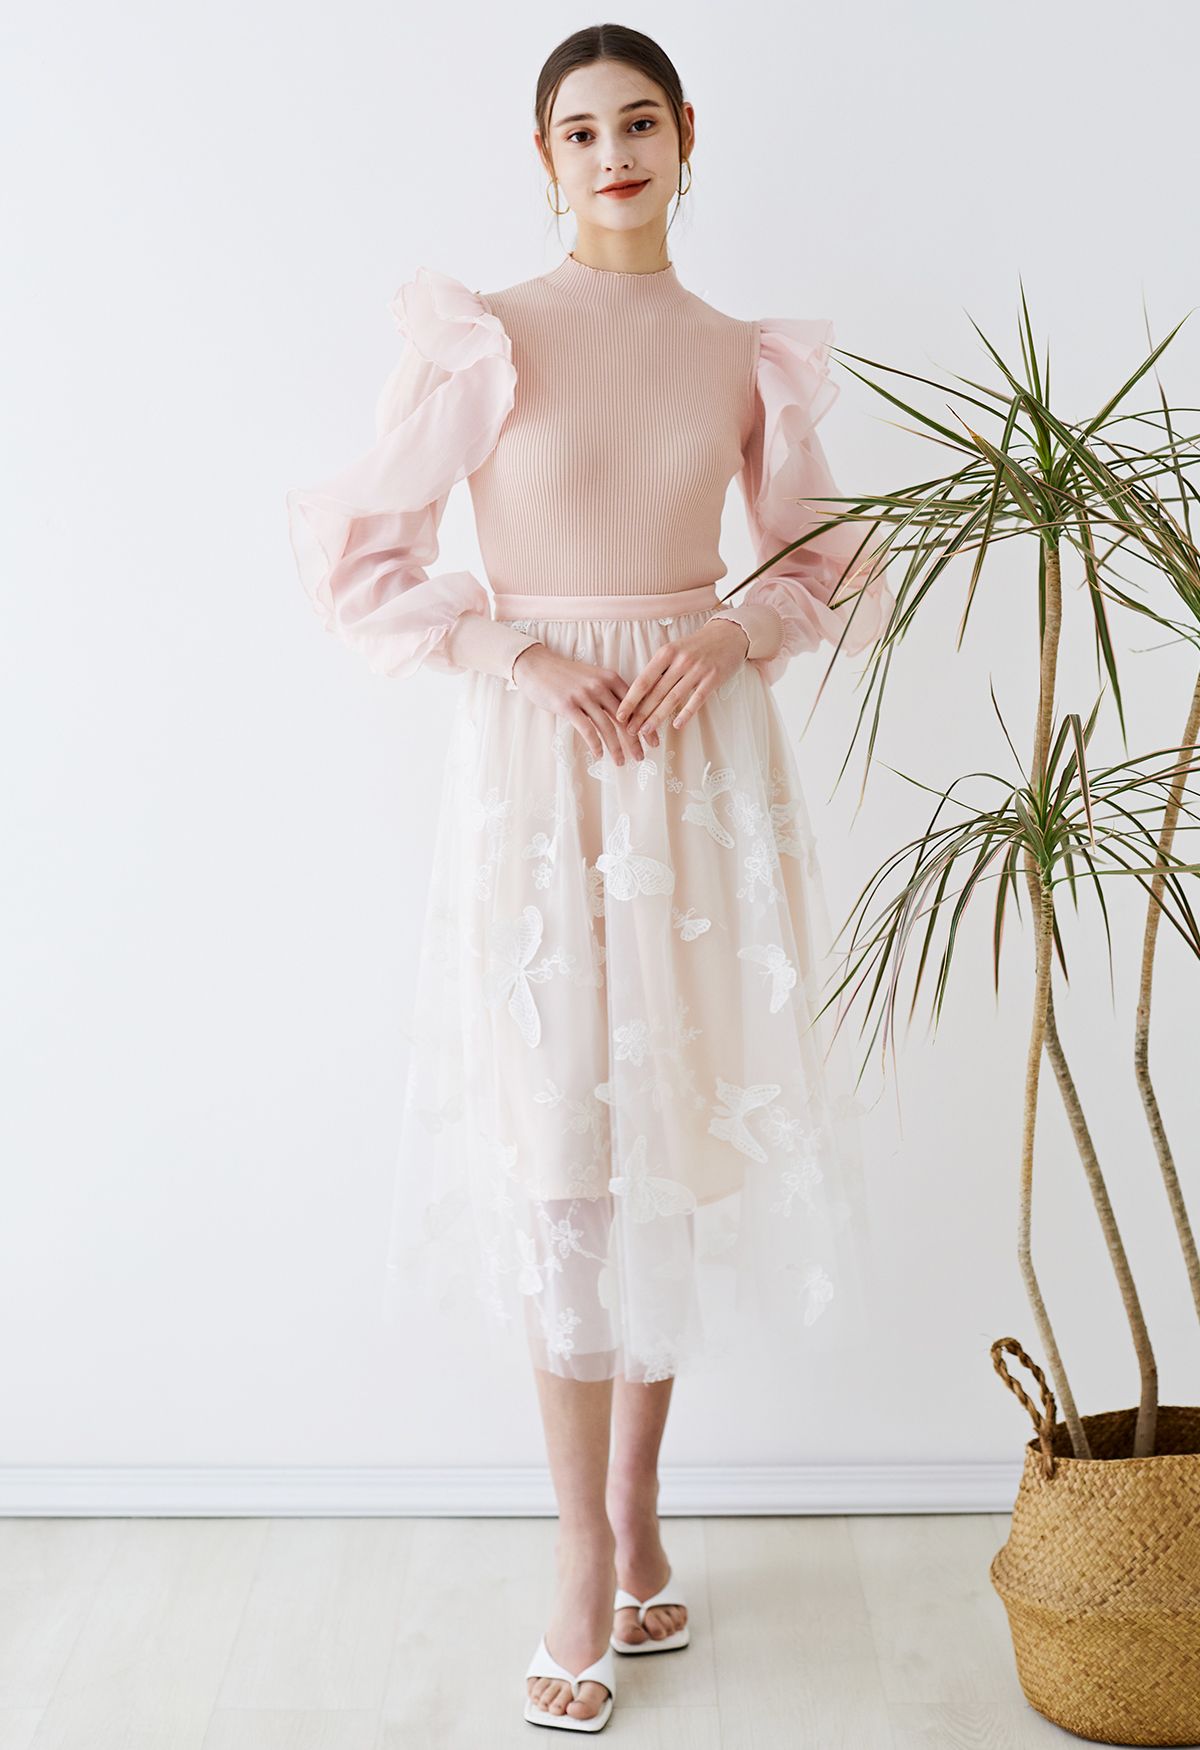 Tiered Ruffle Sleeves Spliced Knit Top in Pink